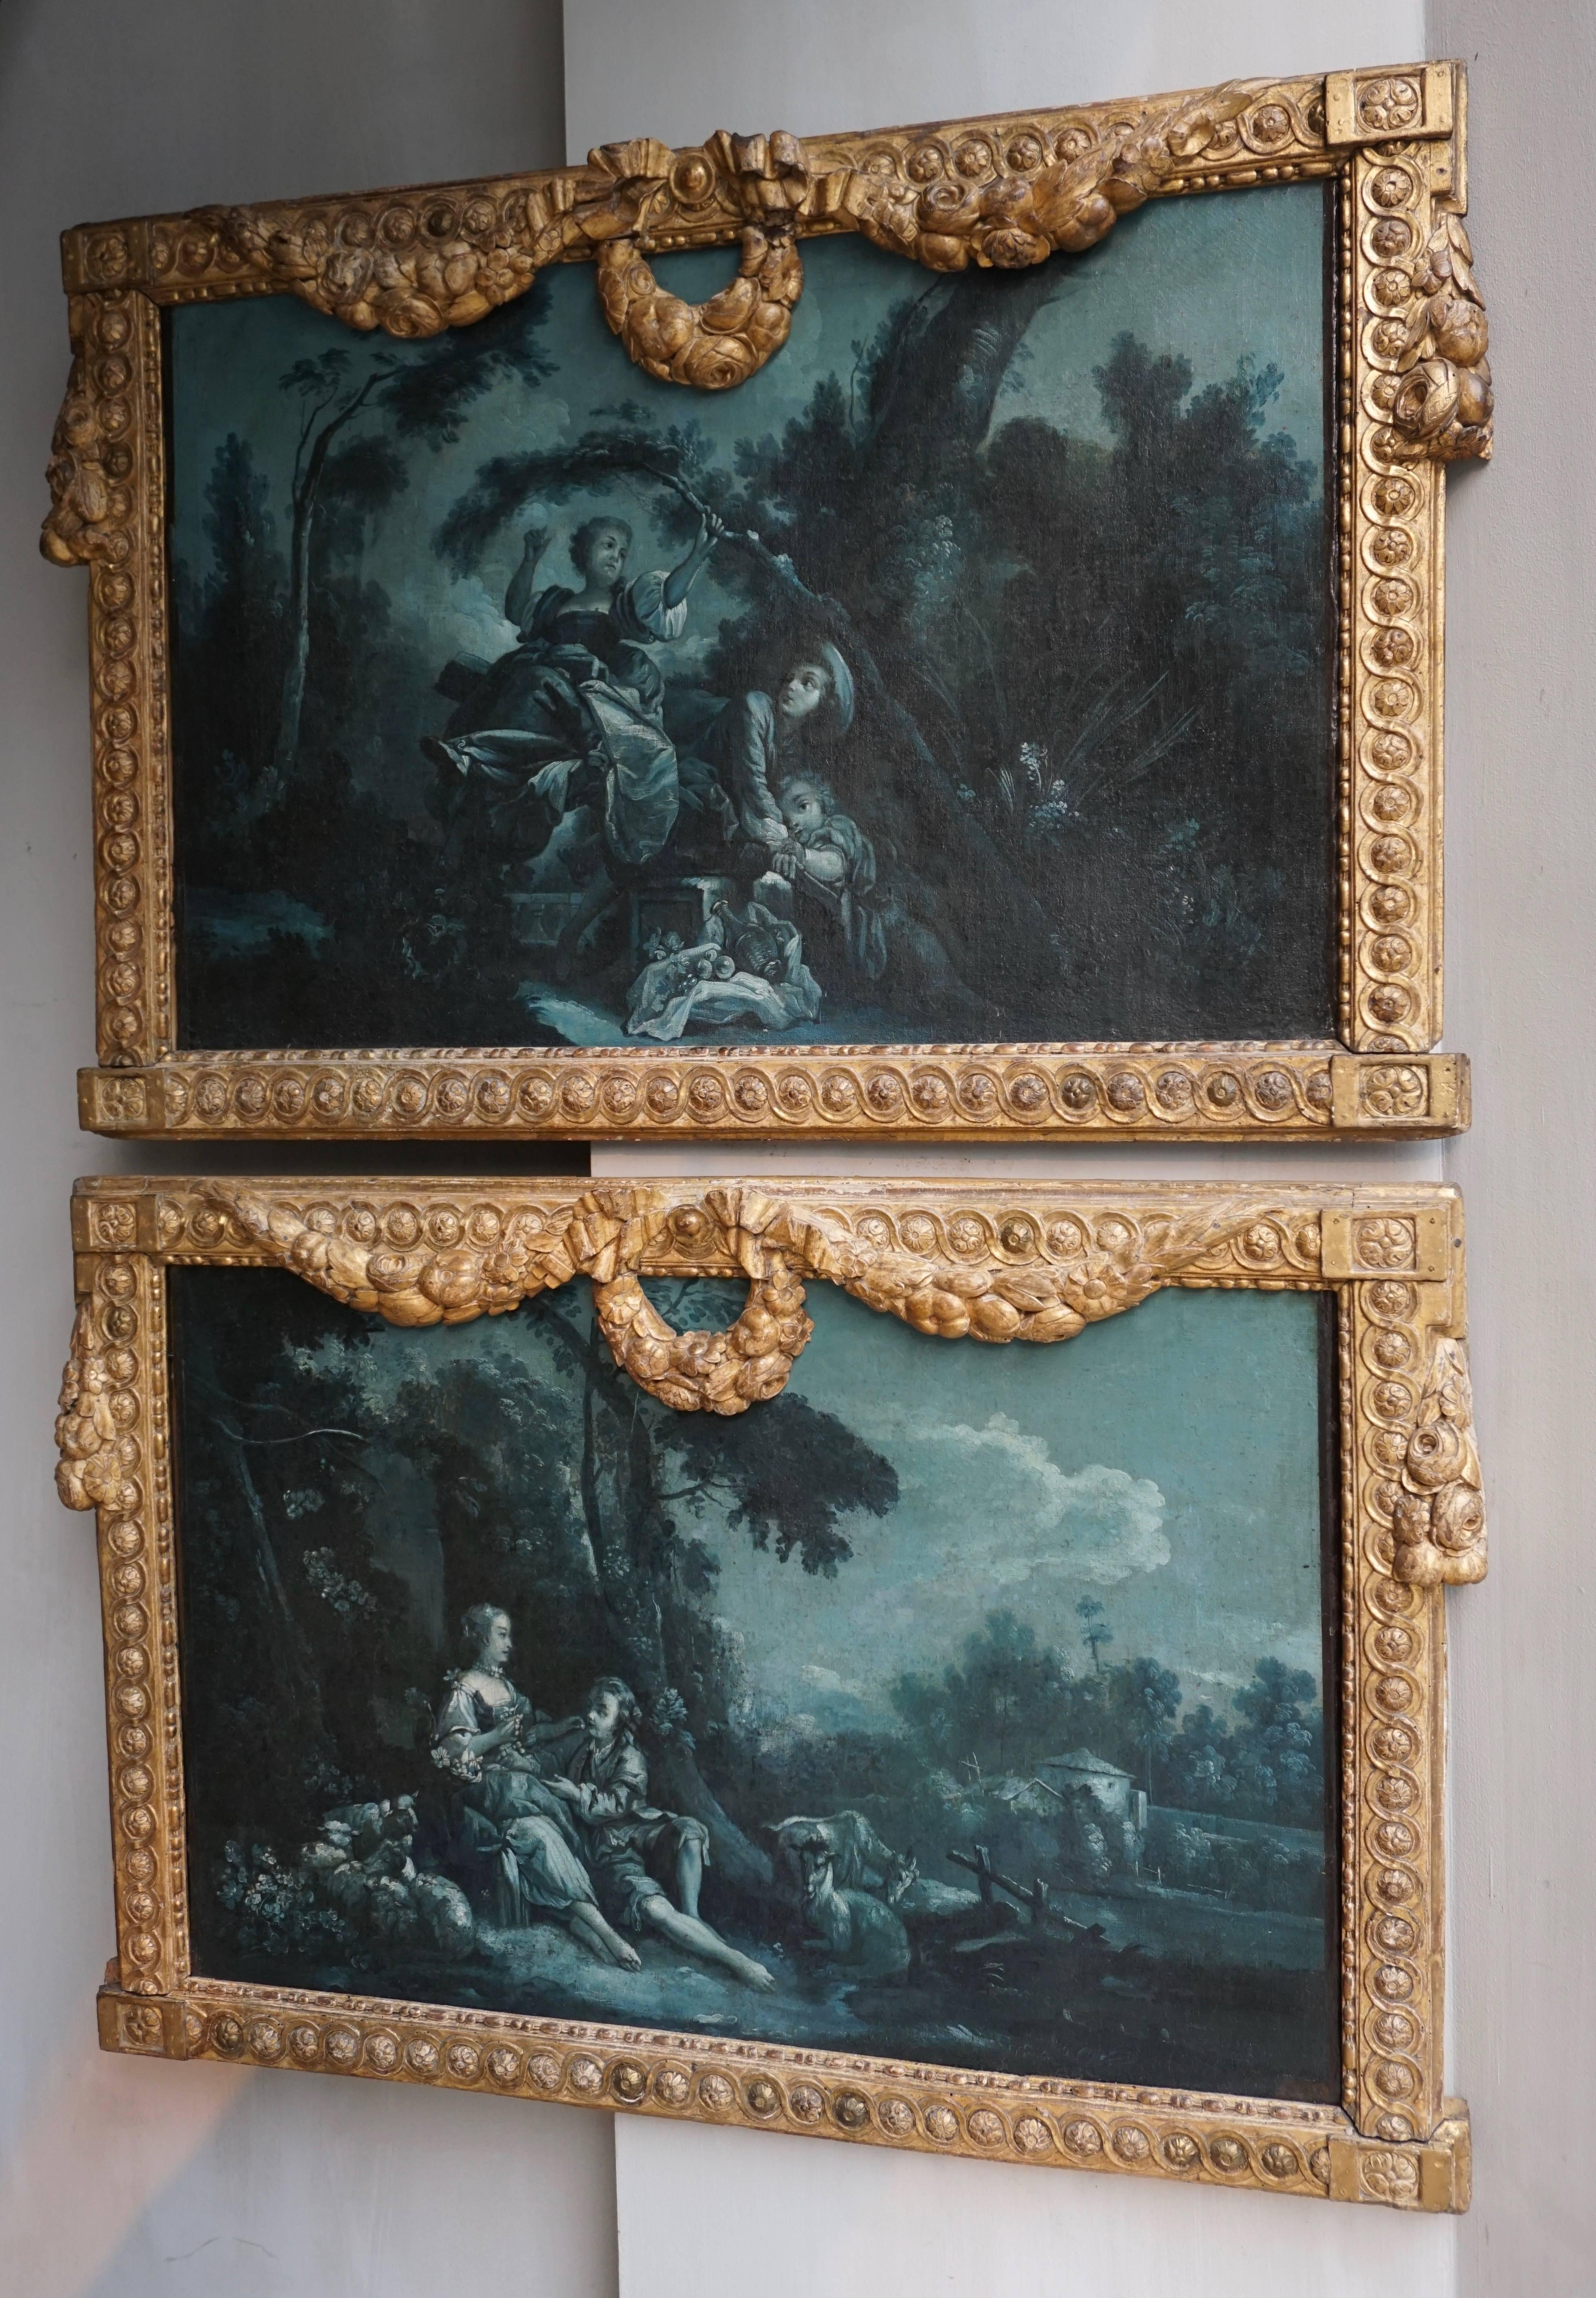 A very fine and rare pair of night blue grisaille overdoor paintings, oil on canvas; France, Louis XVI period, circa 1775.
Grisaille paintings are rarely painted in dark blue and these are surrounded by fabulous carved giltwood frames with garlands